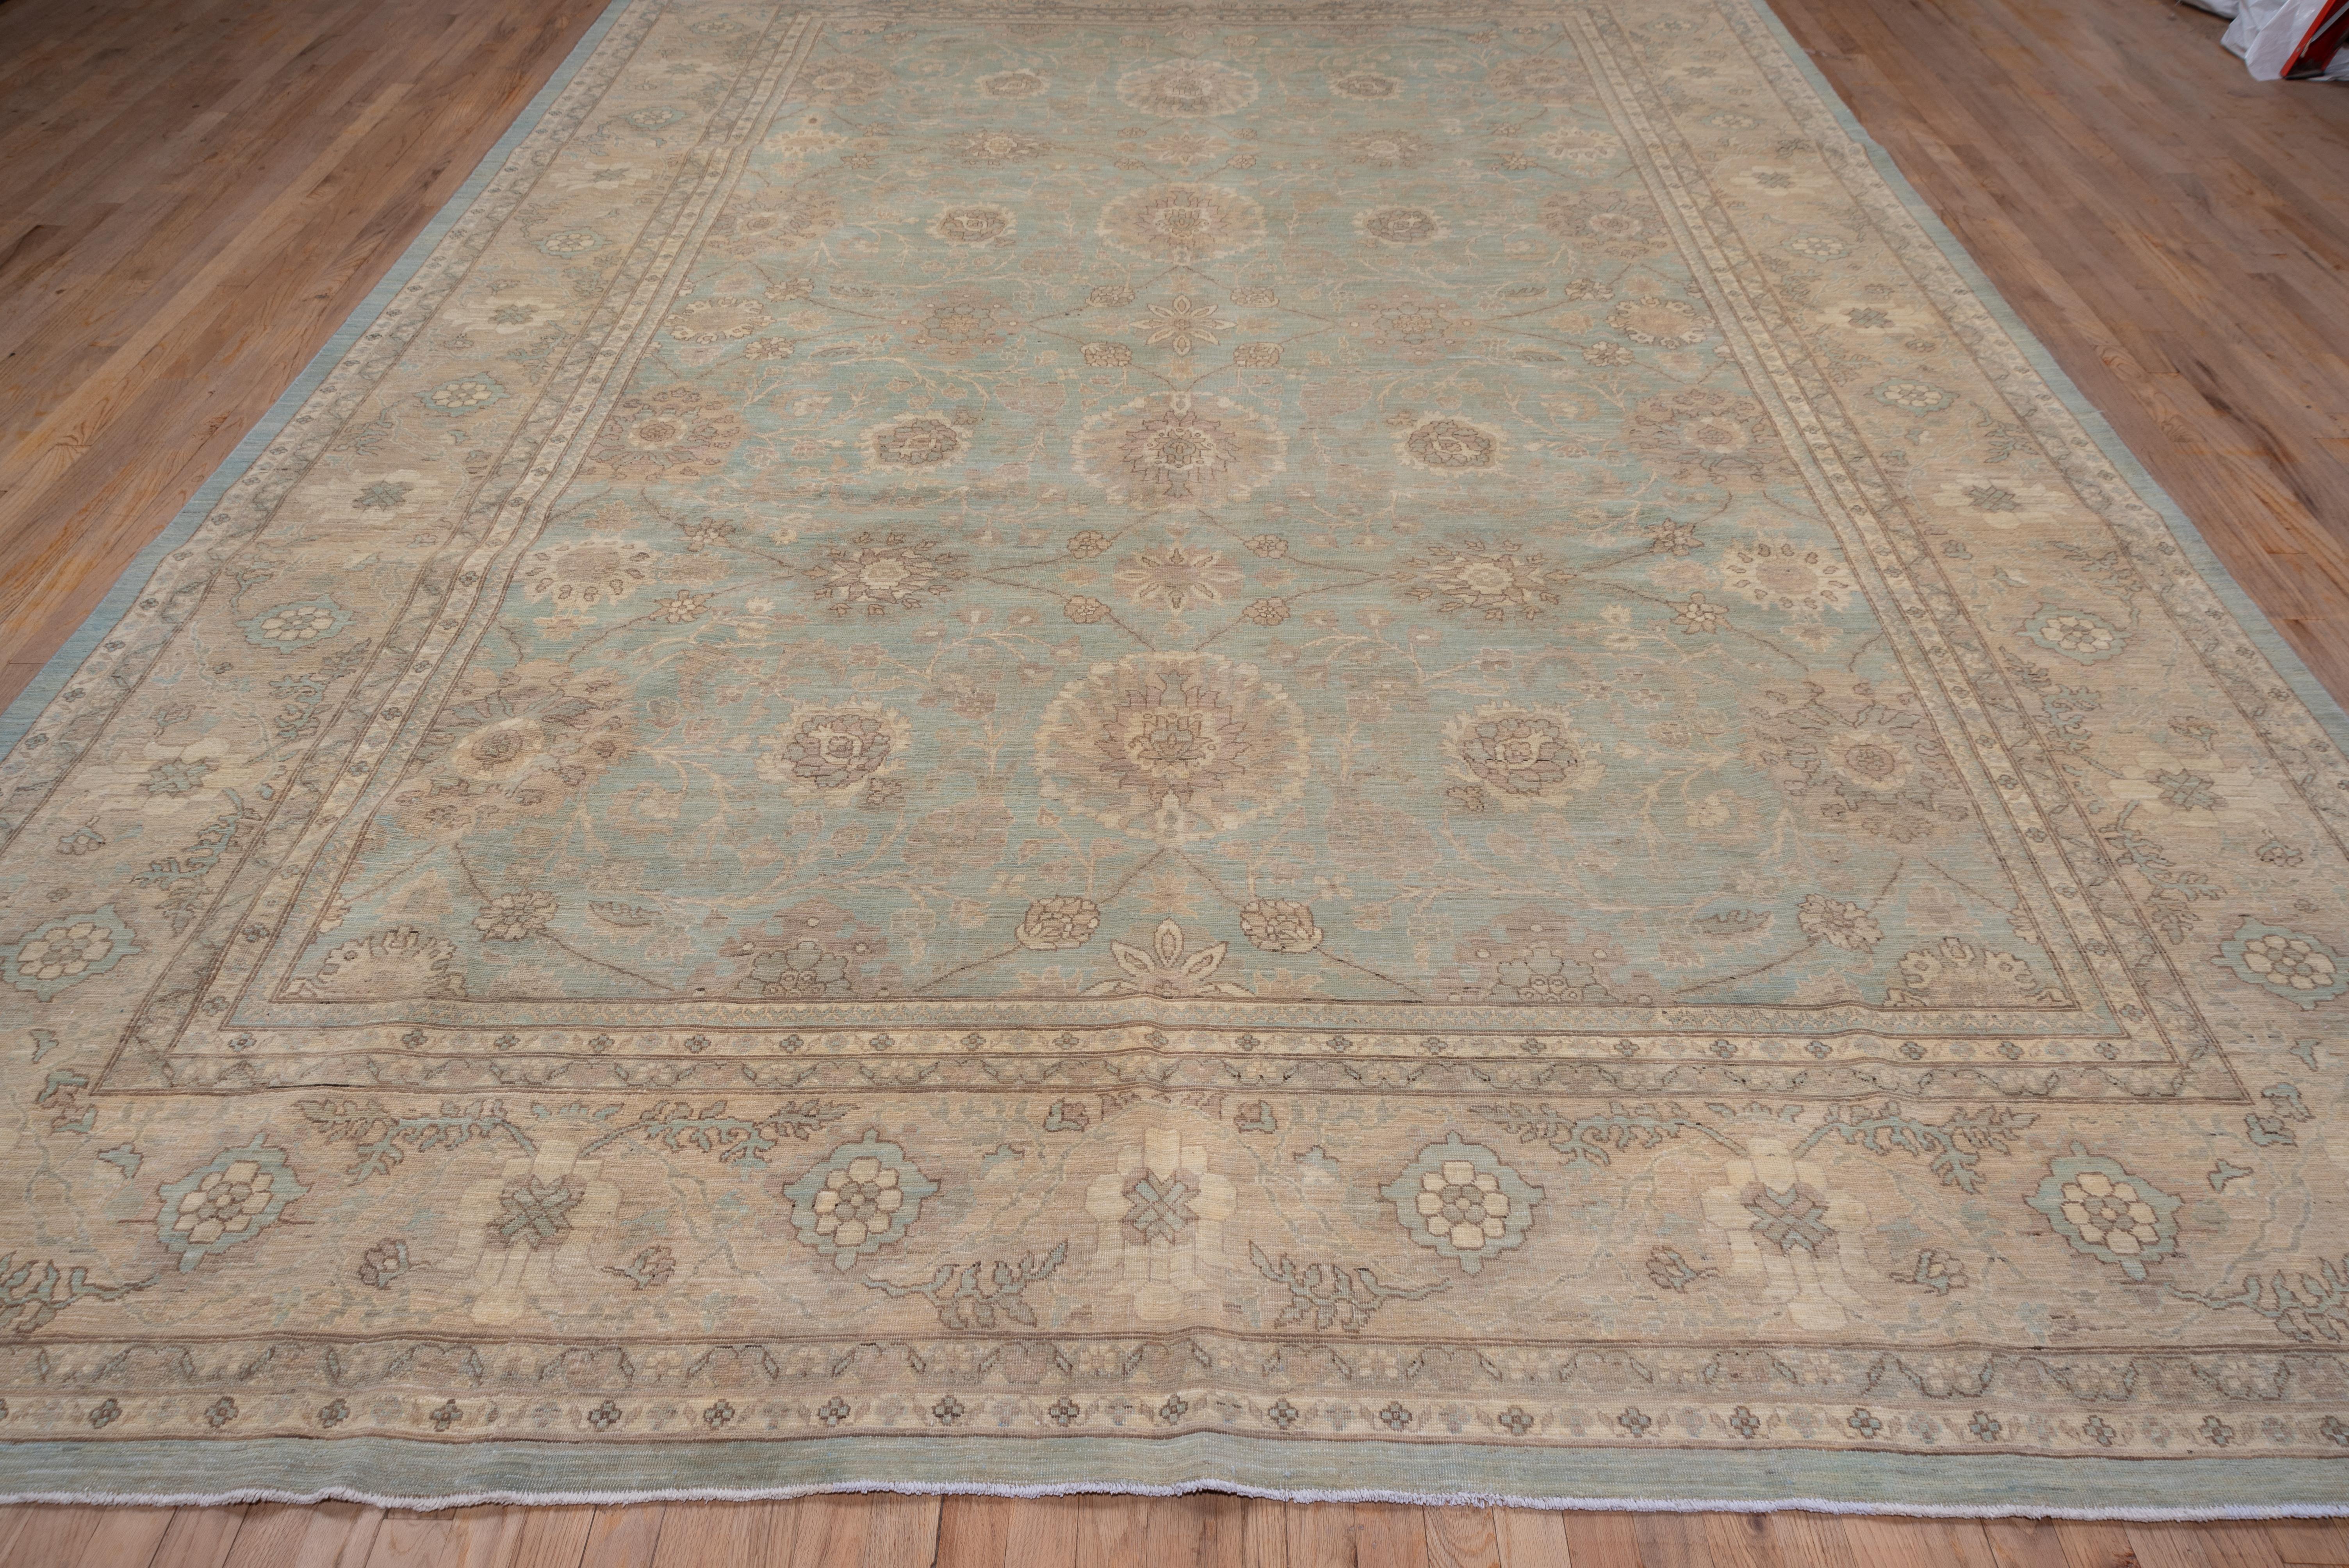 Funny name for an amazingly beautiful rug in the style of the Sivas region of Turkey known for their beautiful hand knotted rugs in softer hues. This rug was hand=knotted in Afghanistan. We love strong color but it is also nice to choose a softer